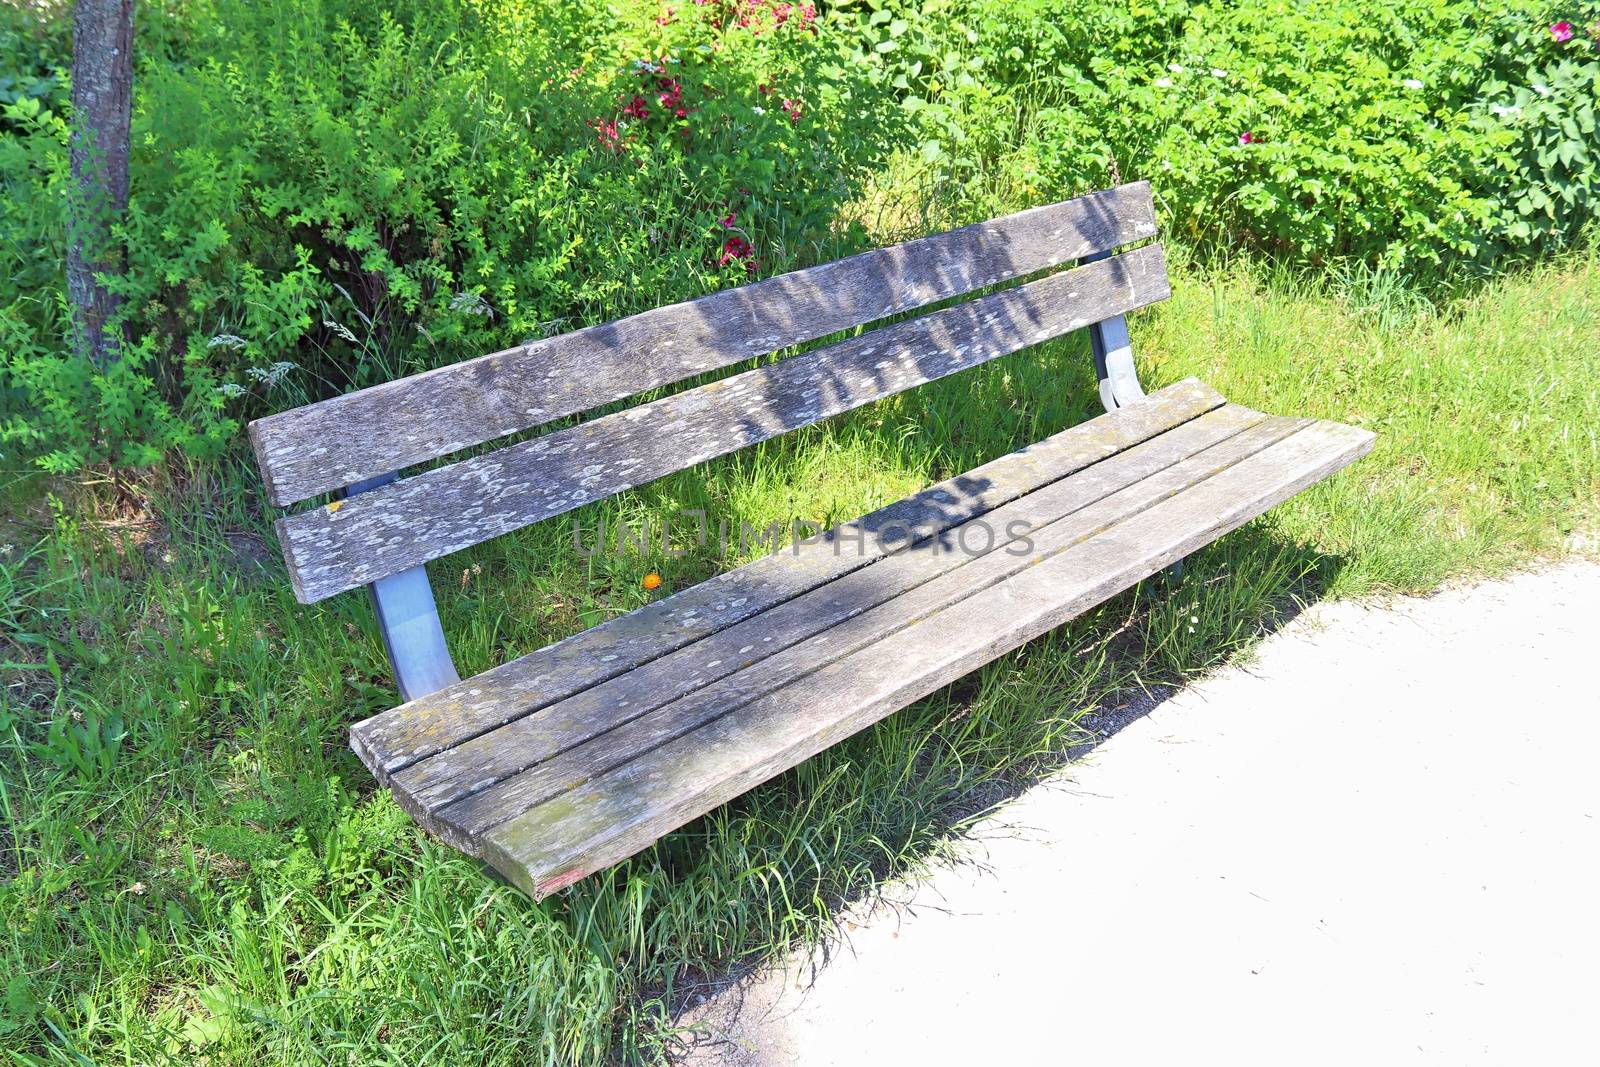 A public empty bench found in northern Europe.